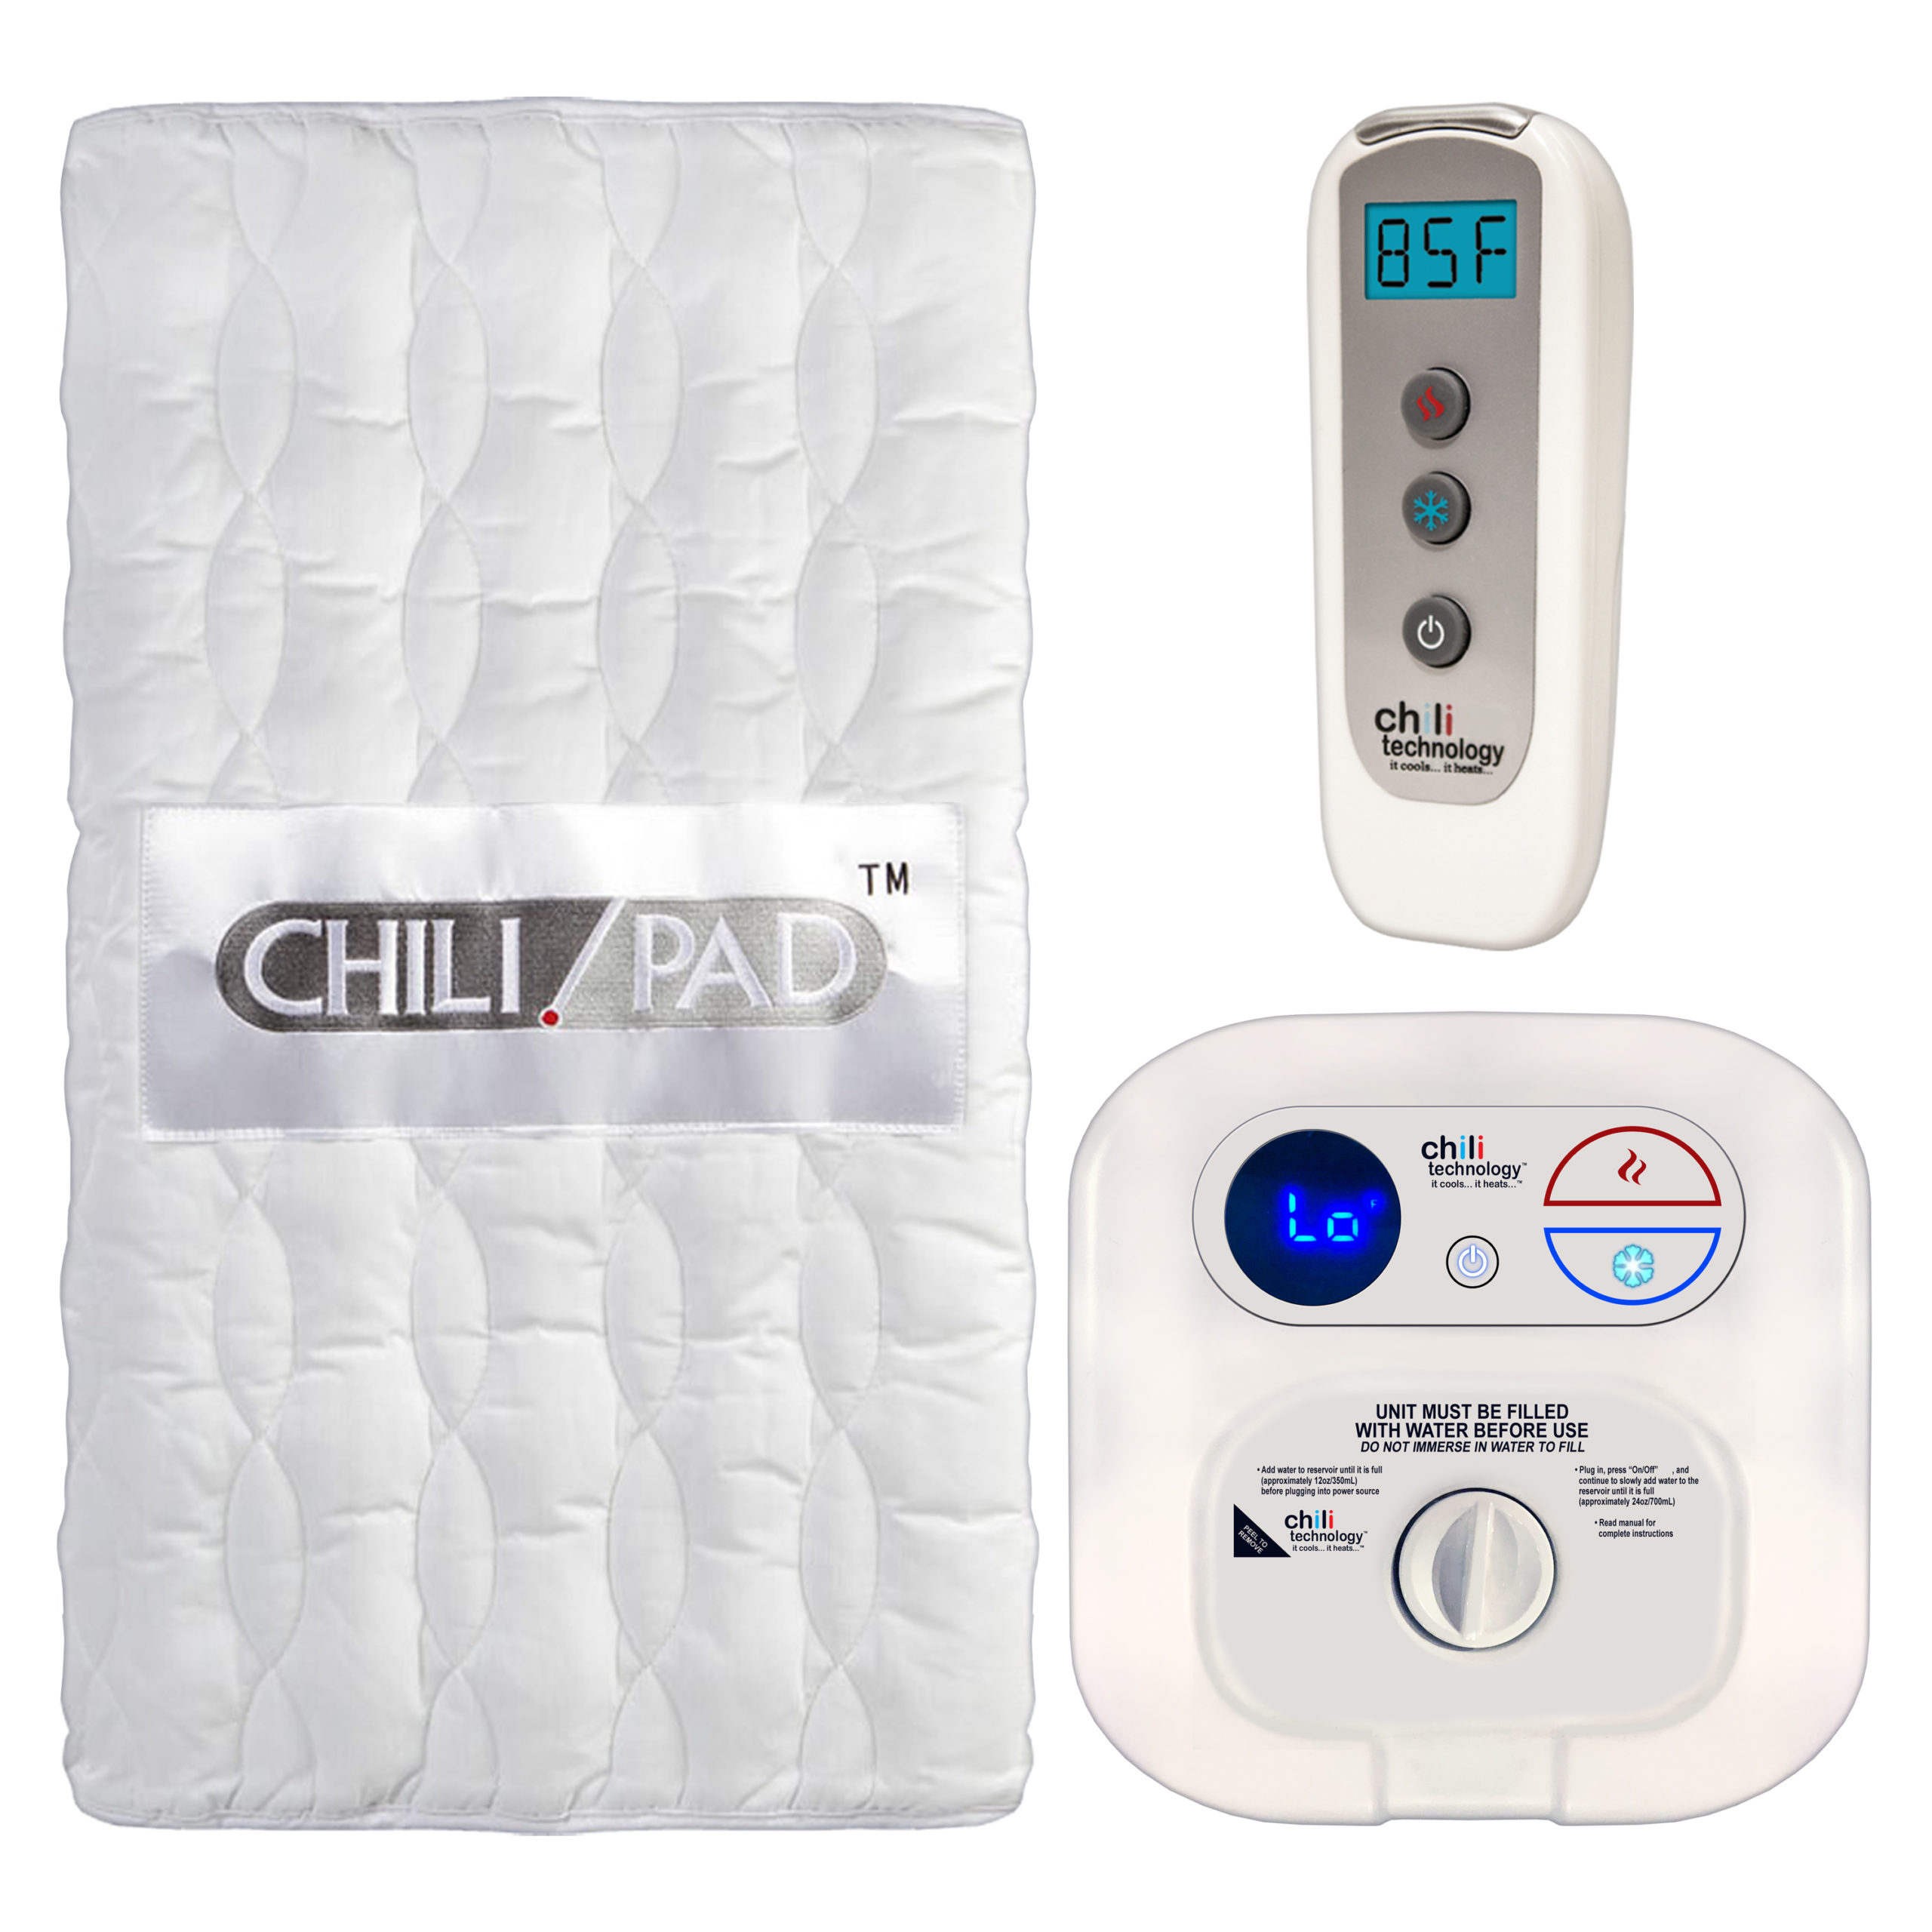 Hot Sleep Sex - Chilipad|Temperature|Mattress|Cube|Sleep|Bed|Water|System|Pad|Ooler|Control|Unit|Night|Bedjet|Technology|Side|Air|Product|Review|Body|Time|Degrees|Noise|Price|Pod|Tubes|Heat|Device|Cooling|Room|King|App|Features|Size|Cover|Sleepers|Sheets|Energy|Warranty|Quality|Mattress Pad|Control Unit|Cube Sleep System|Sleep Pod|Distilled Water|Remote Control|Sleep System|Desired Temperature|Water Tank|Chilipad Cube|Chili Technology|Deep Sleep|Pro Cover|Ooler Sleep System|Hydrogen Peroxide|Cool Mesh|Sleep Temperature|Fitted Sheet|Pod Pro|Sleep Quality|Smartphone App|Sleep Systems|Chilipad Sleep System|New Mattress|Sleep Trial|Full Refund|Mattress Topper|Body Heat|Air Flow|Chilipad Review